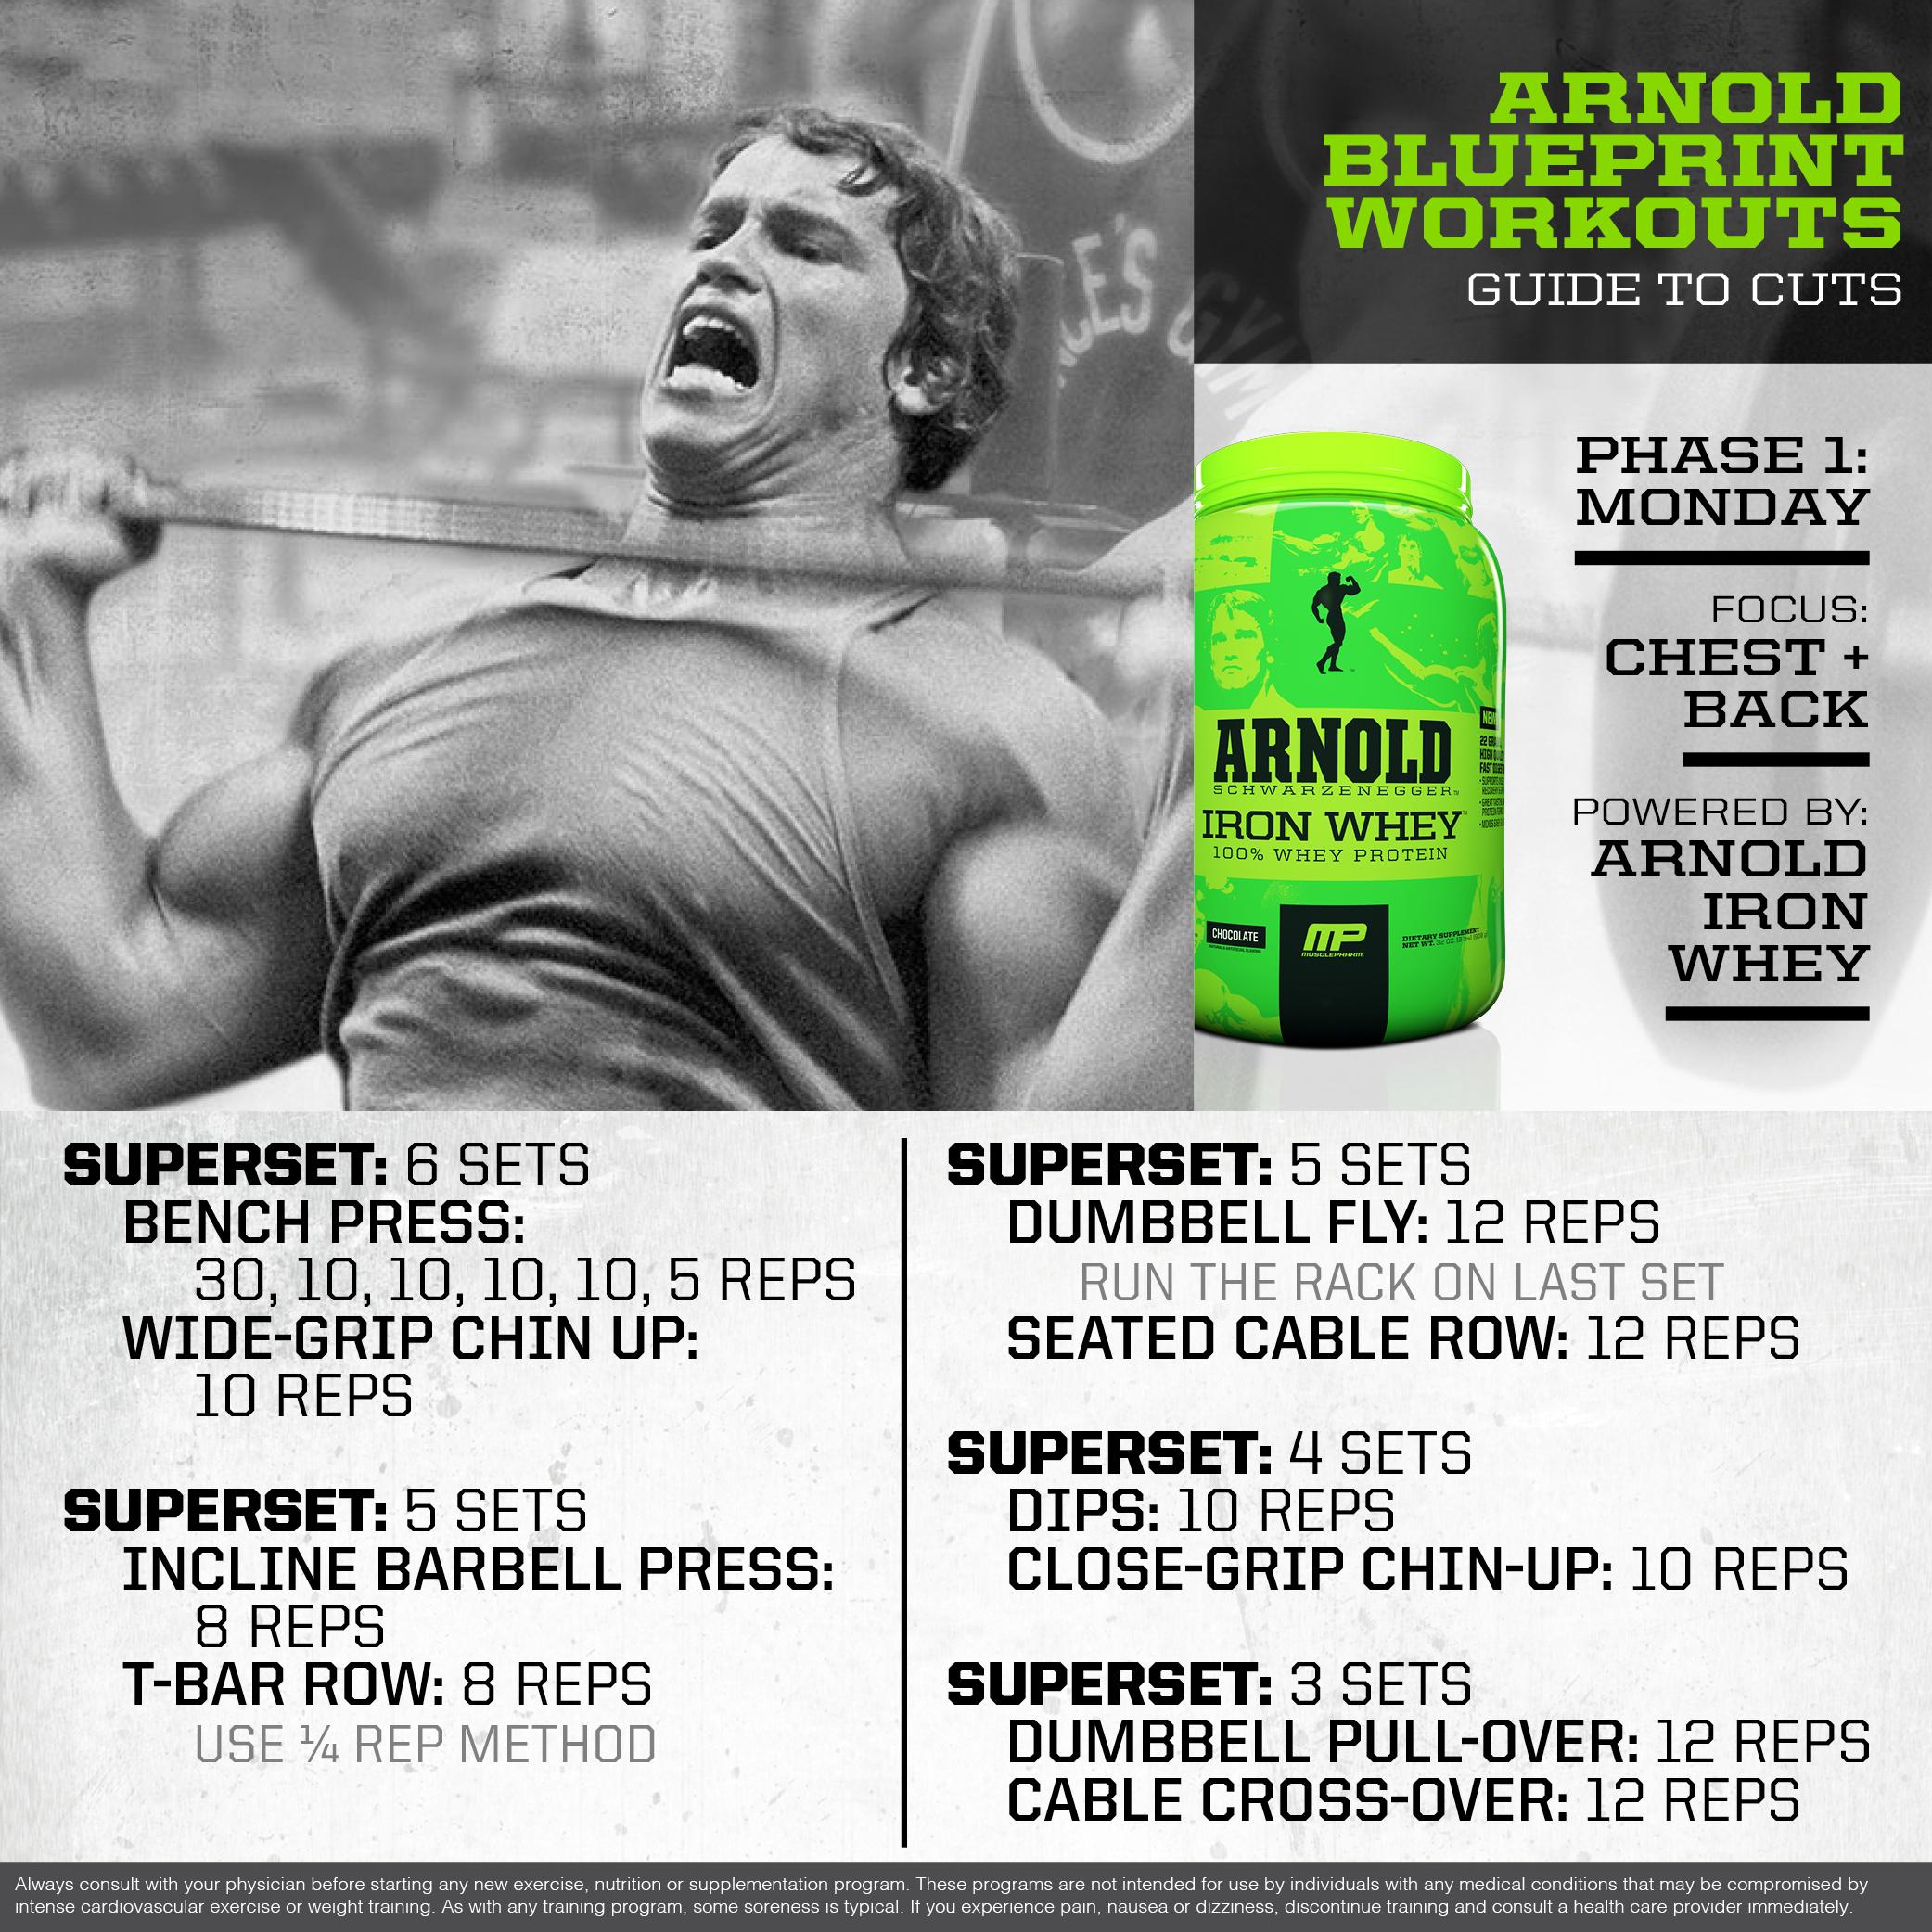 What Is The Arnold Workout Split? - Steel Supplements